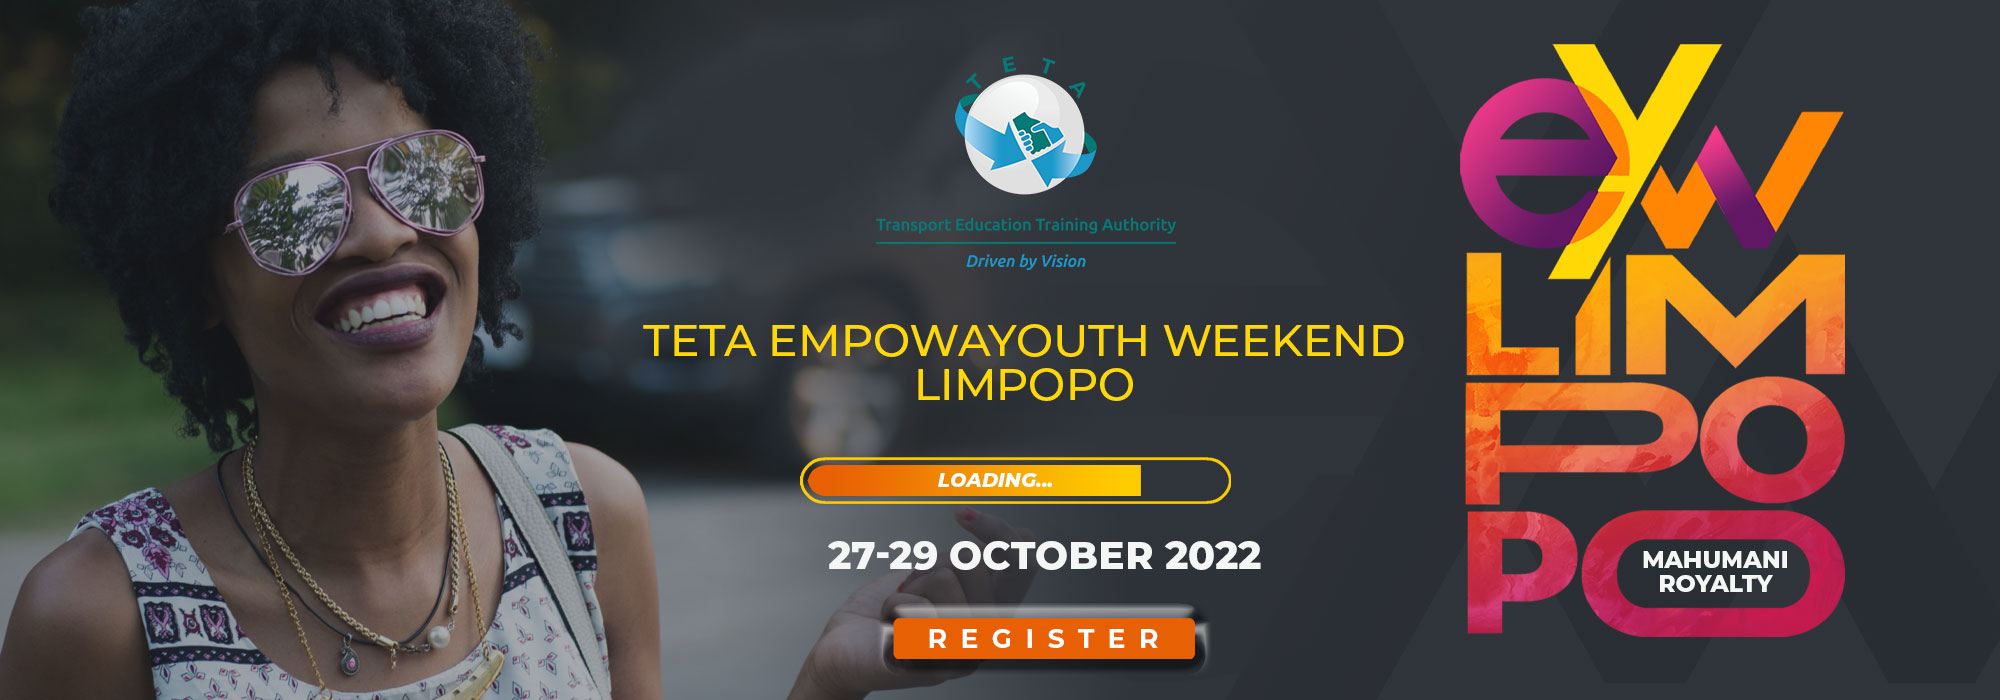 empowayouth-weekend-limpopo-2022